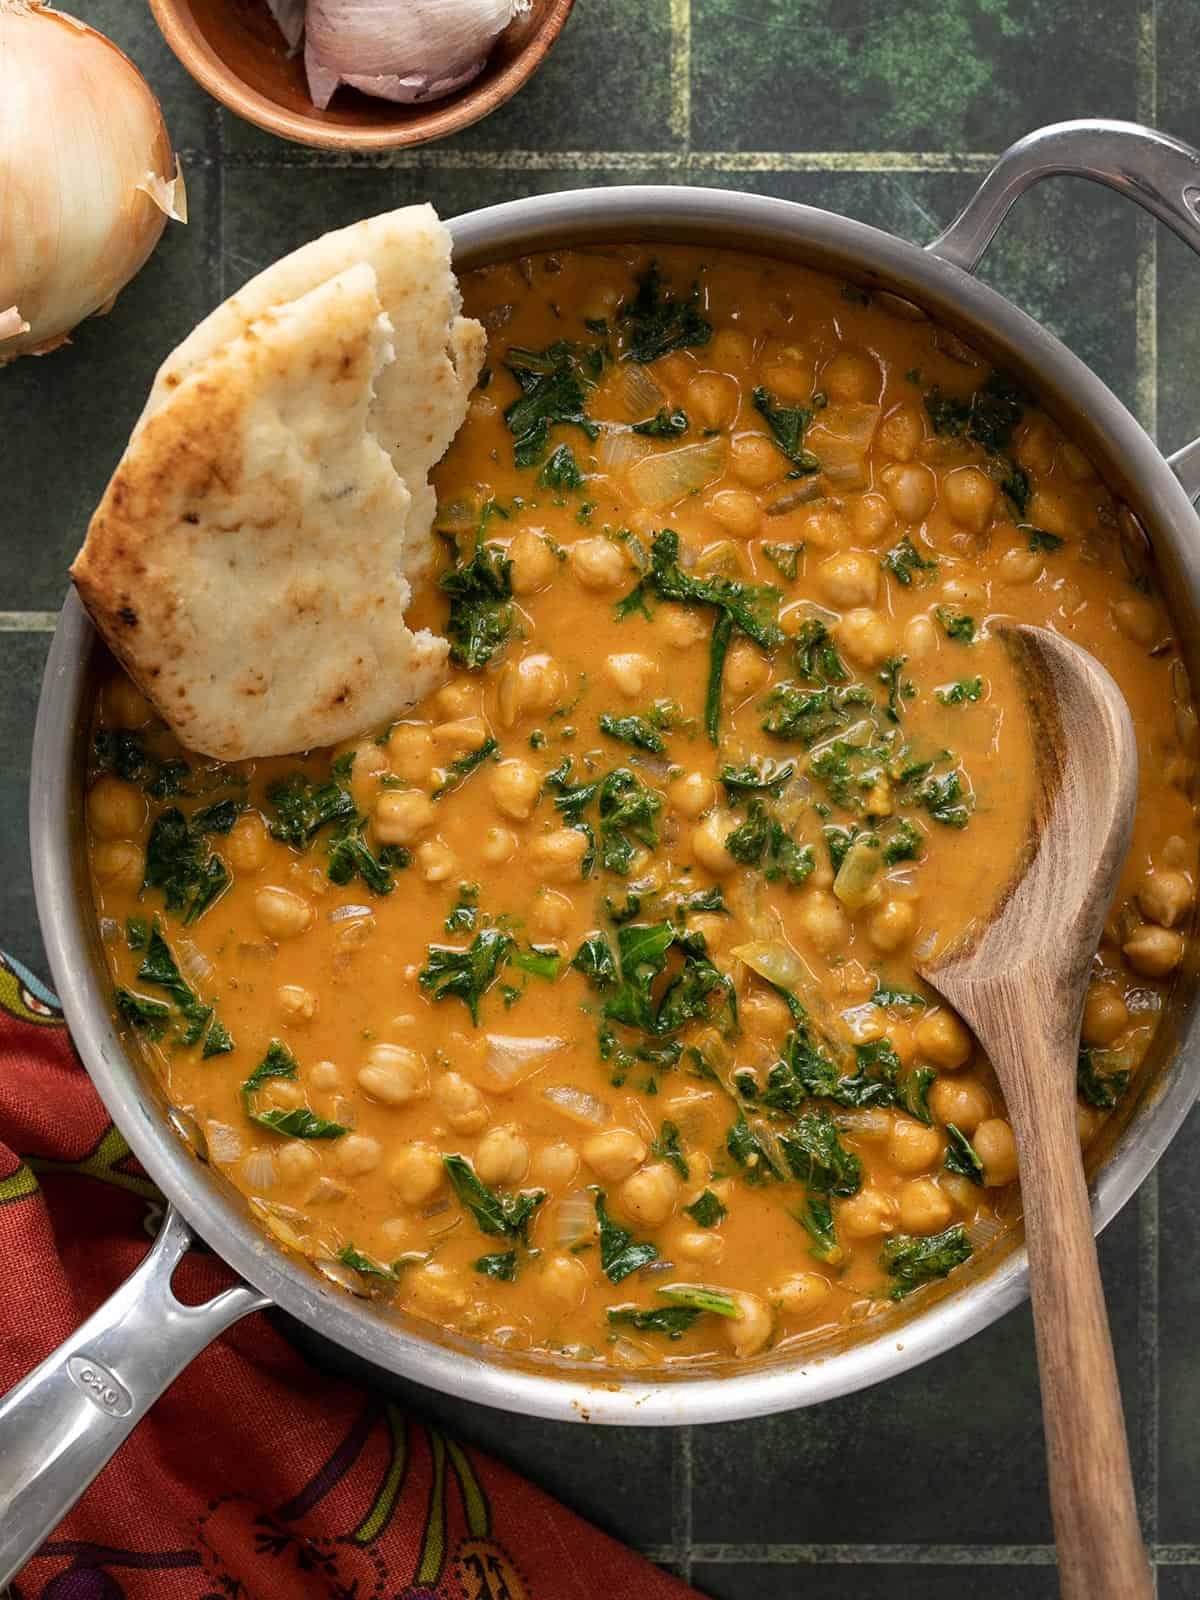 Finished skillet full of coconut curry chickpeas with naan and a wooden spoon.